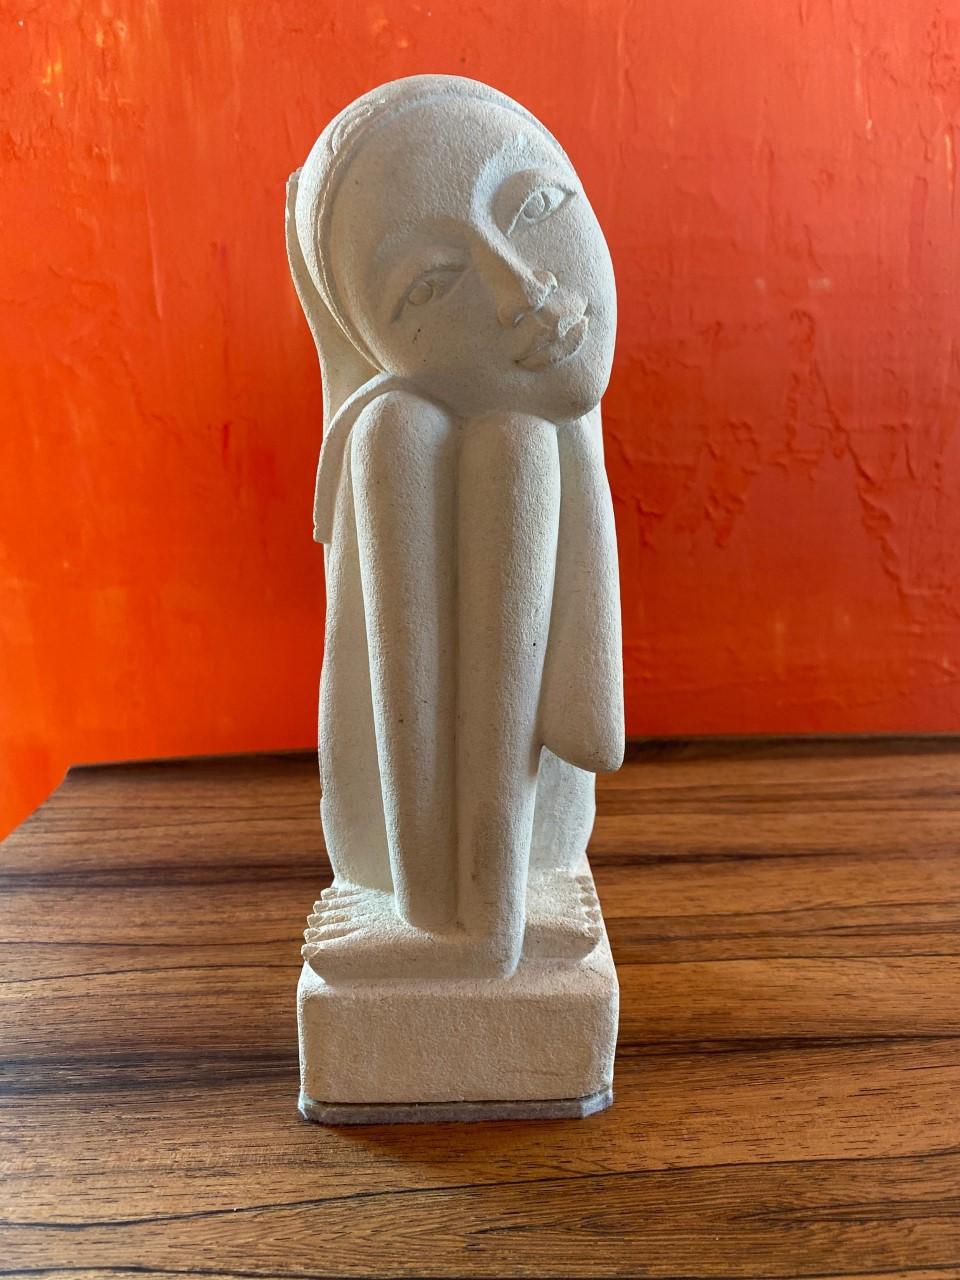 Beautiful and enigmatic plaster sculpture of a sitting woman. This stylized rendering presents a female form that is long limbed but concentric around itself. The visage mesmerizes with big and delicate features. The head emulates a scarf-like motif